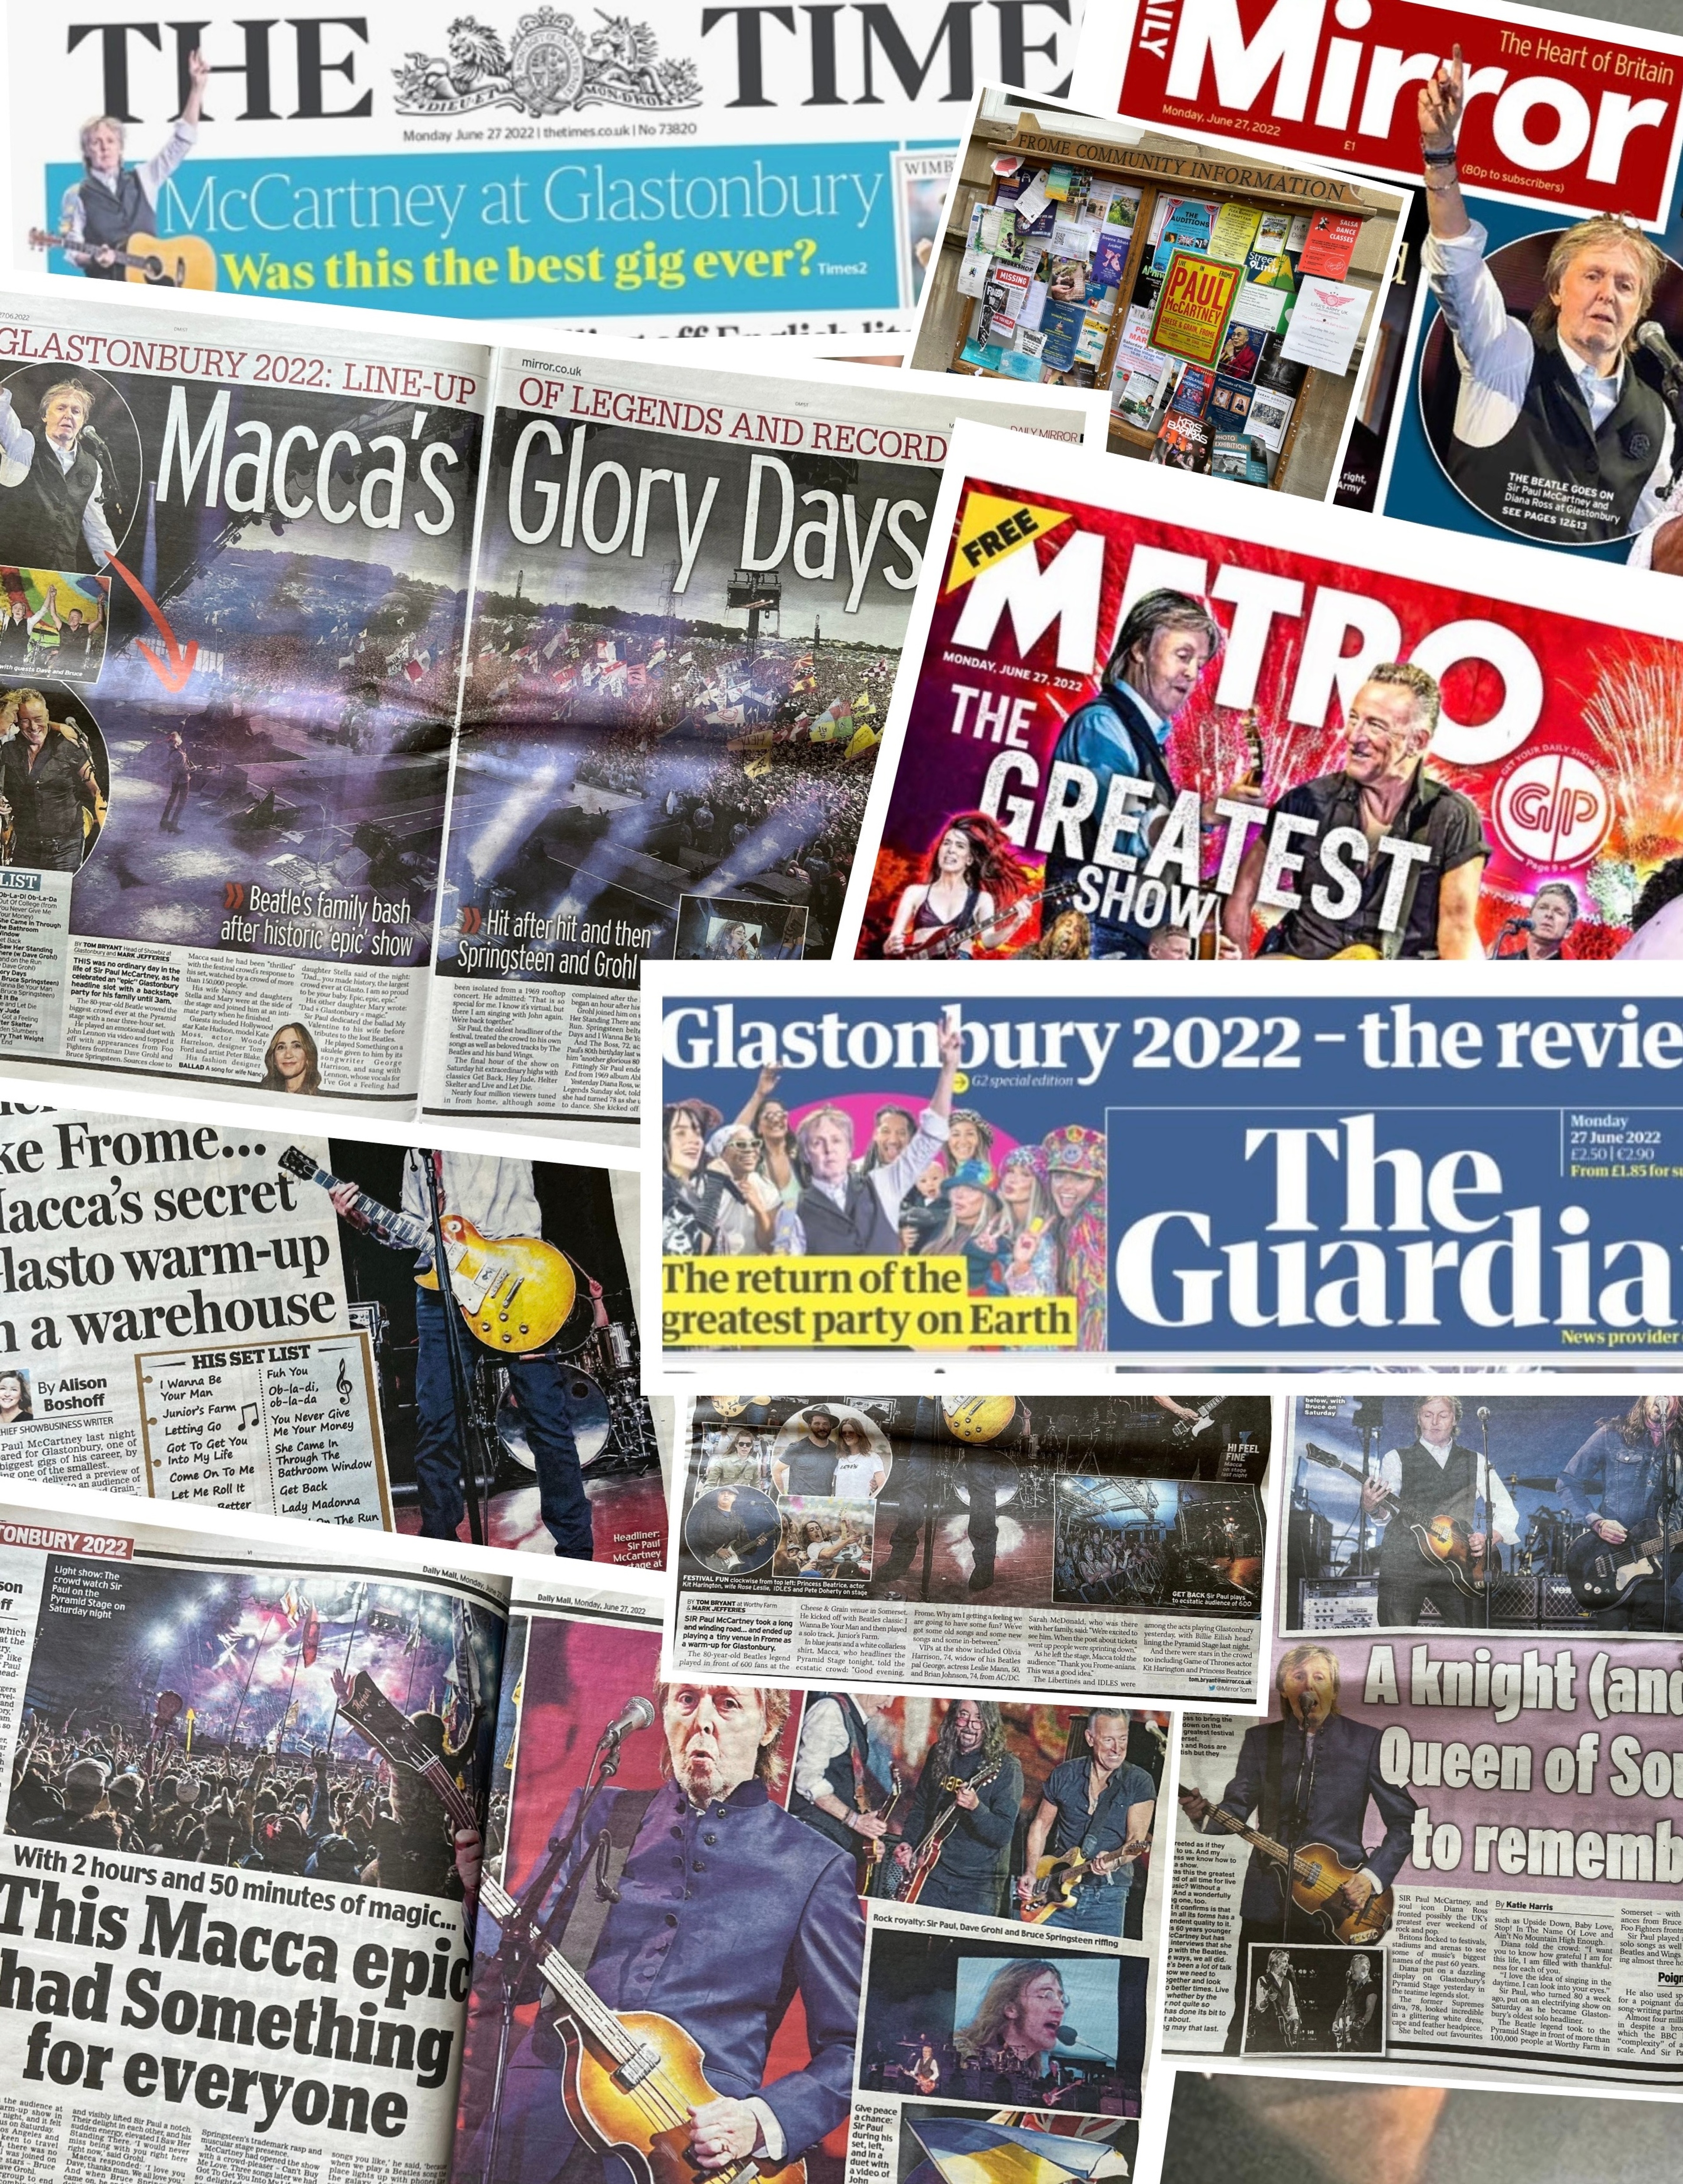 Collage of newspaper headlines about Paul's headline show at Glastonbury